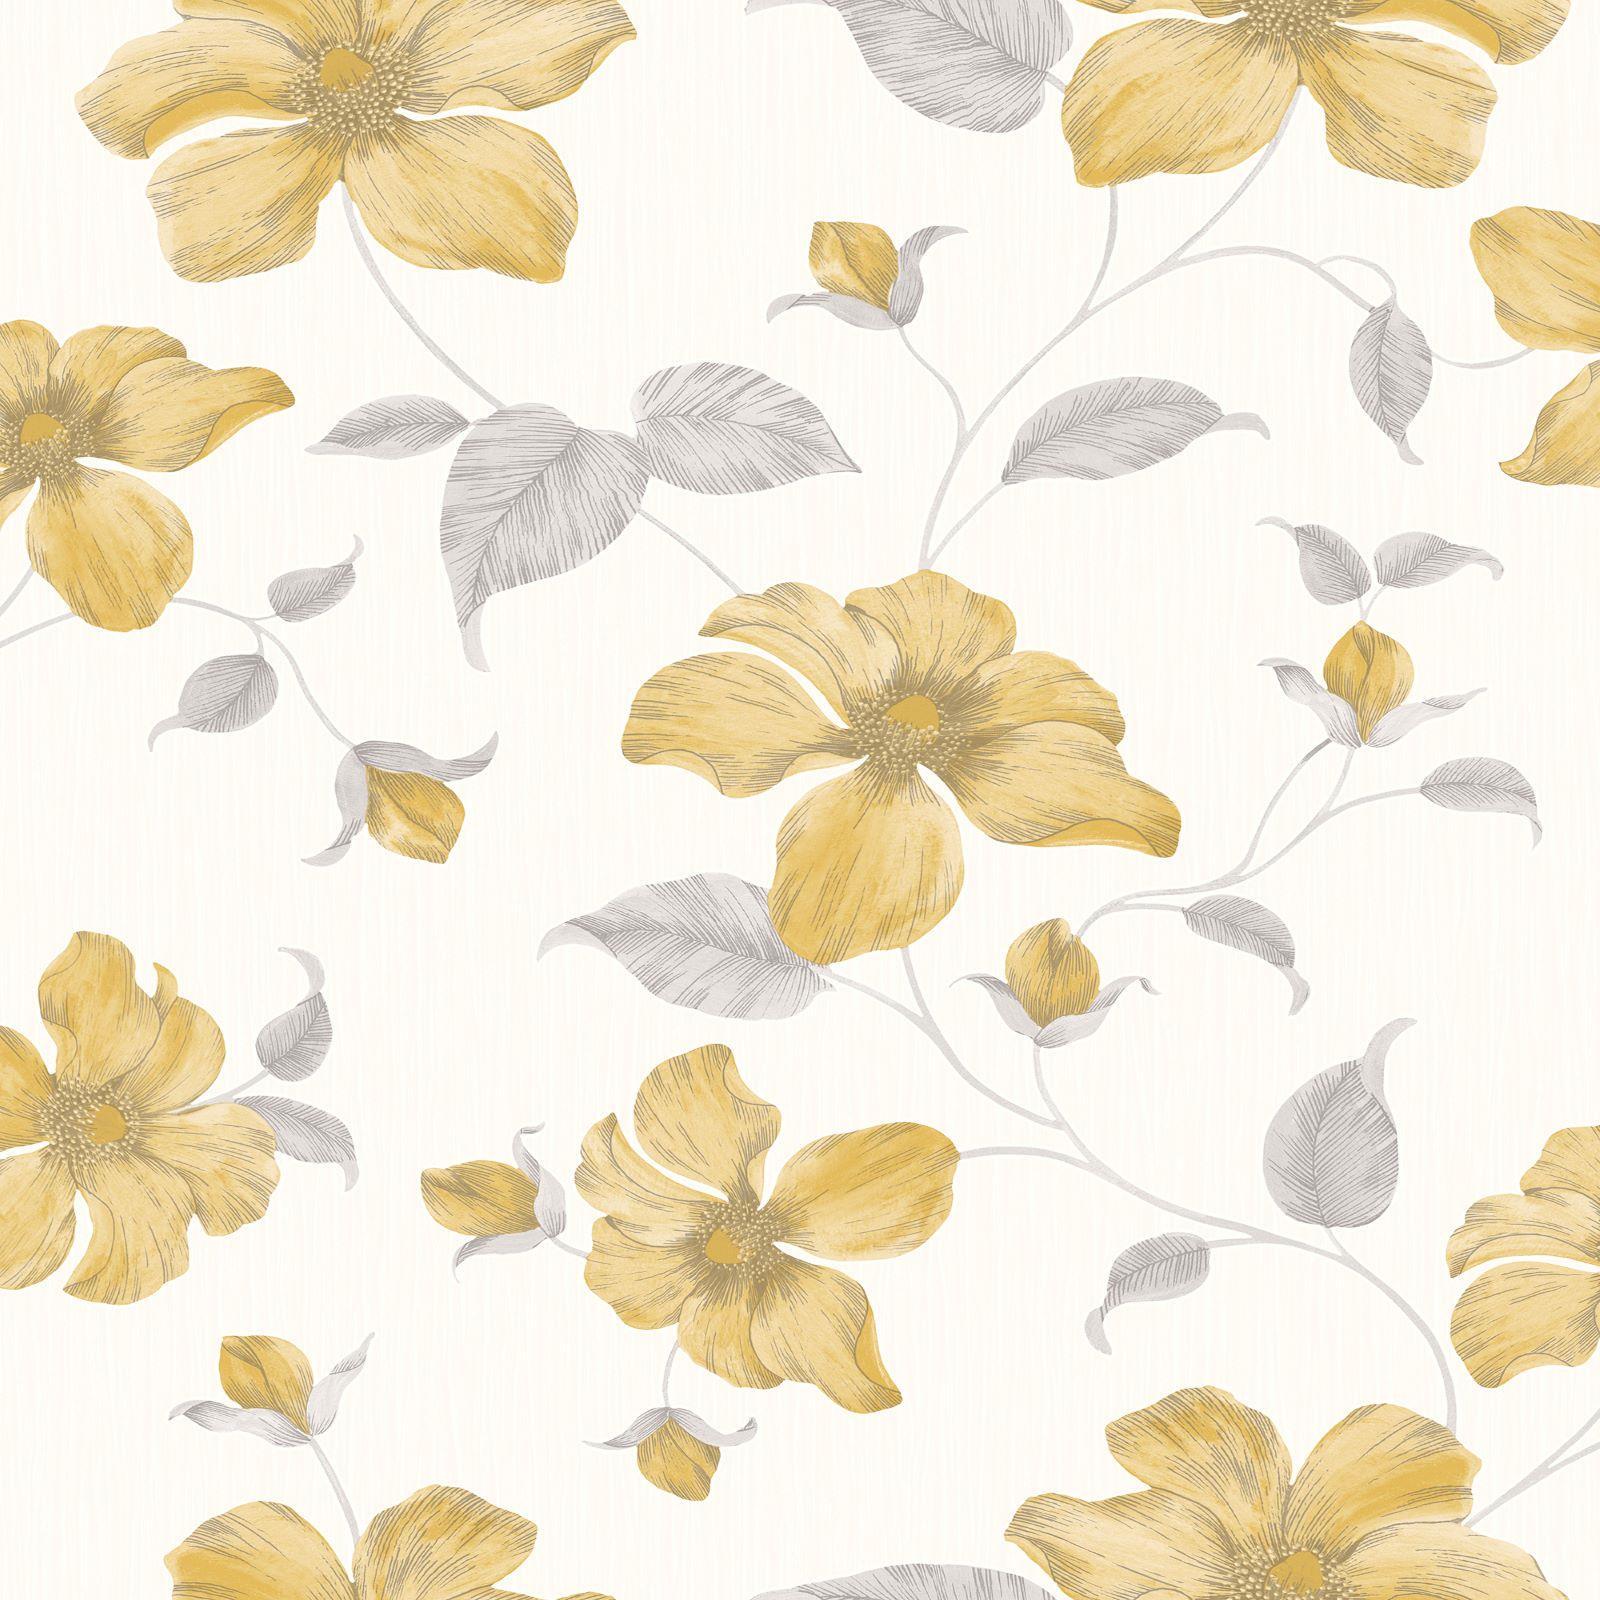 Grey and Yellow Flower Wallpapers - Top Free Grey and Yellow Flower ...